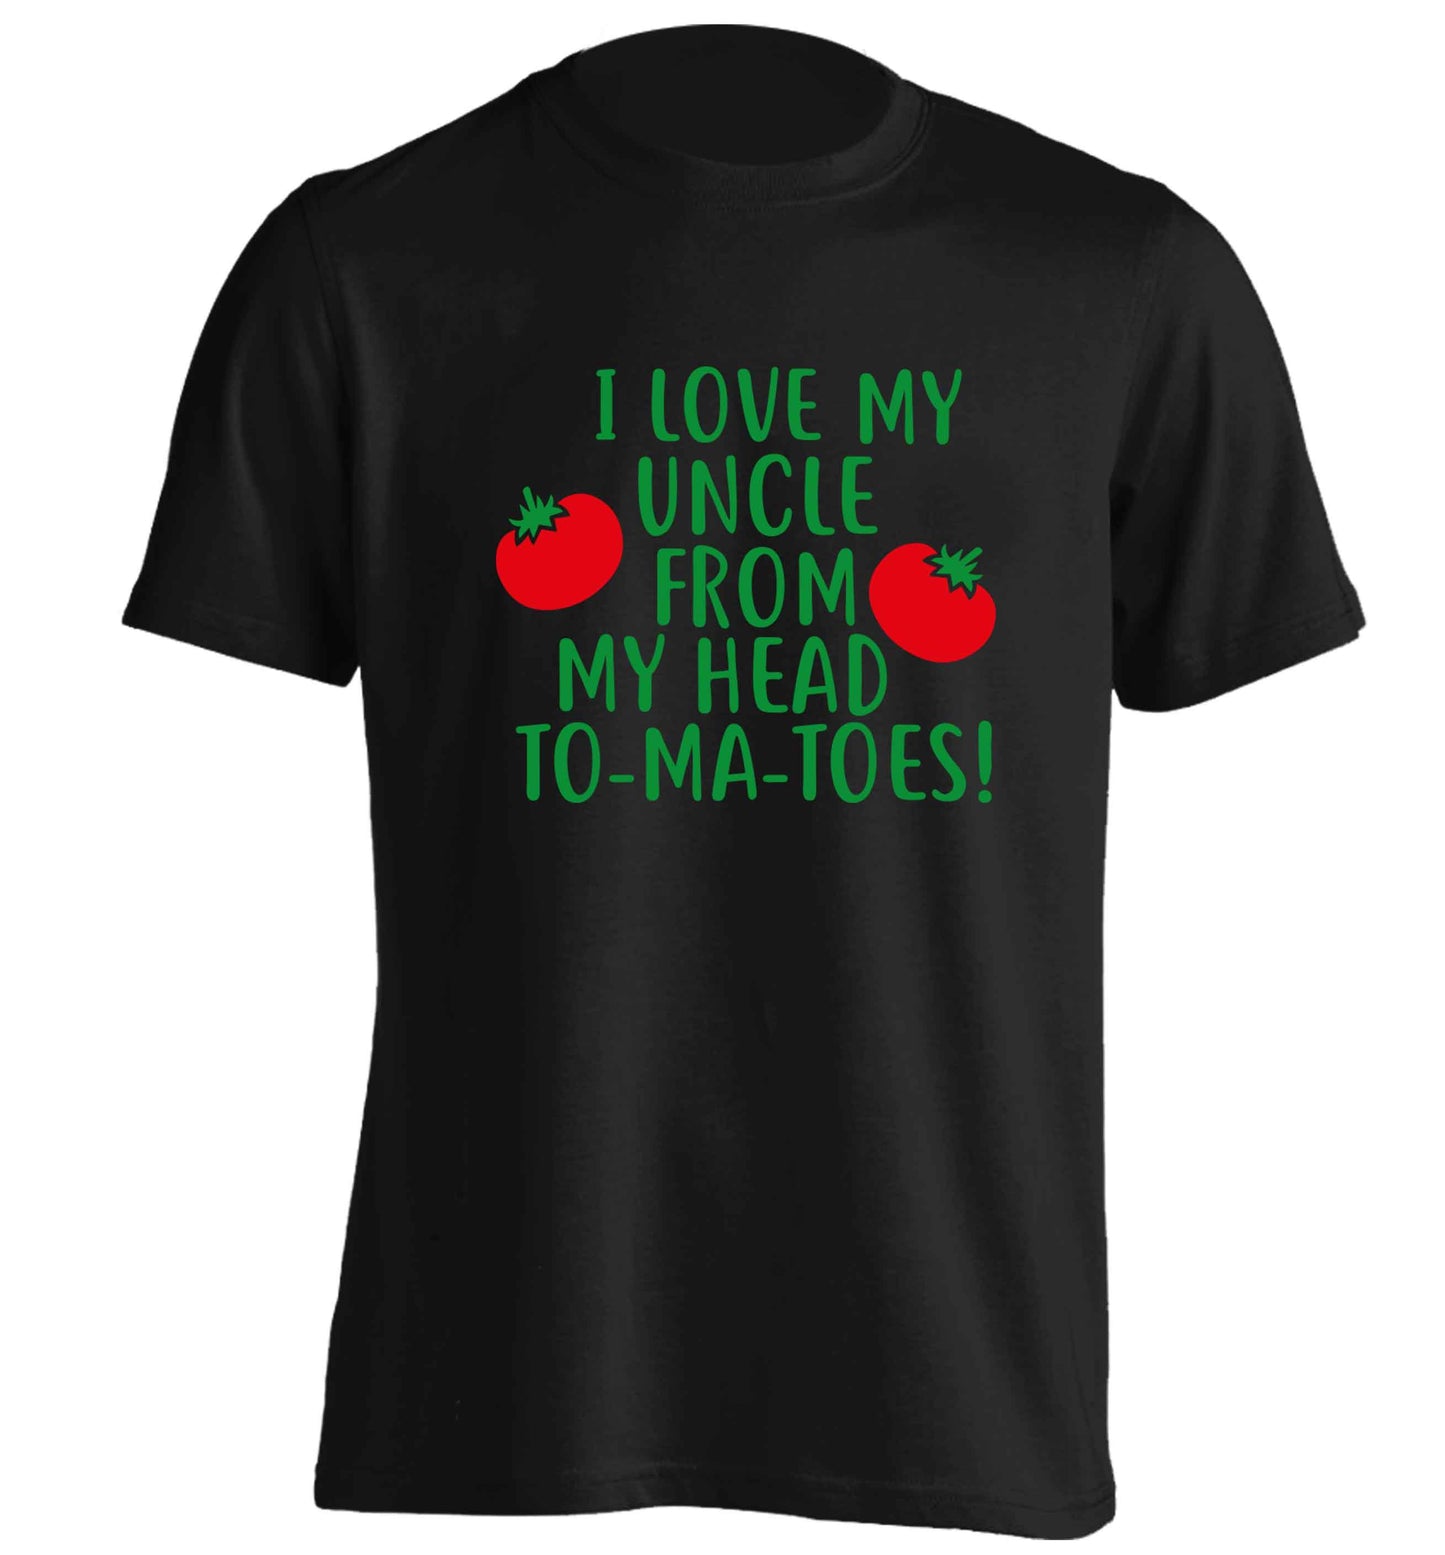 I love my uncle from my head To-Ma-Toes adults unisex black Tshirt 2XL